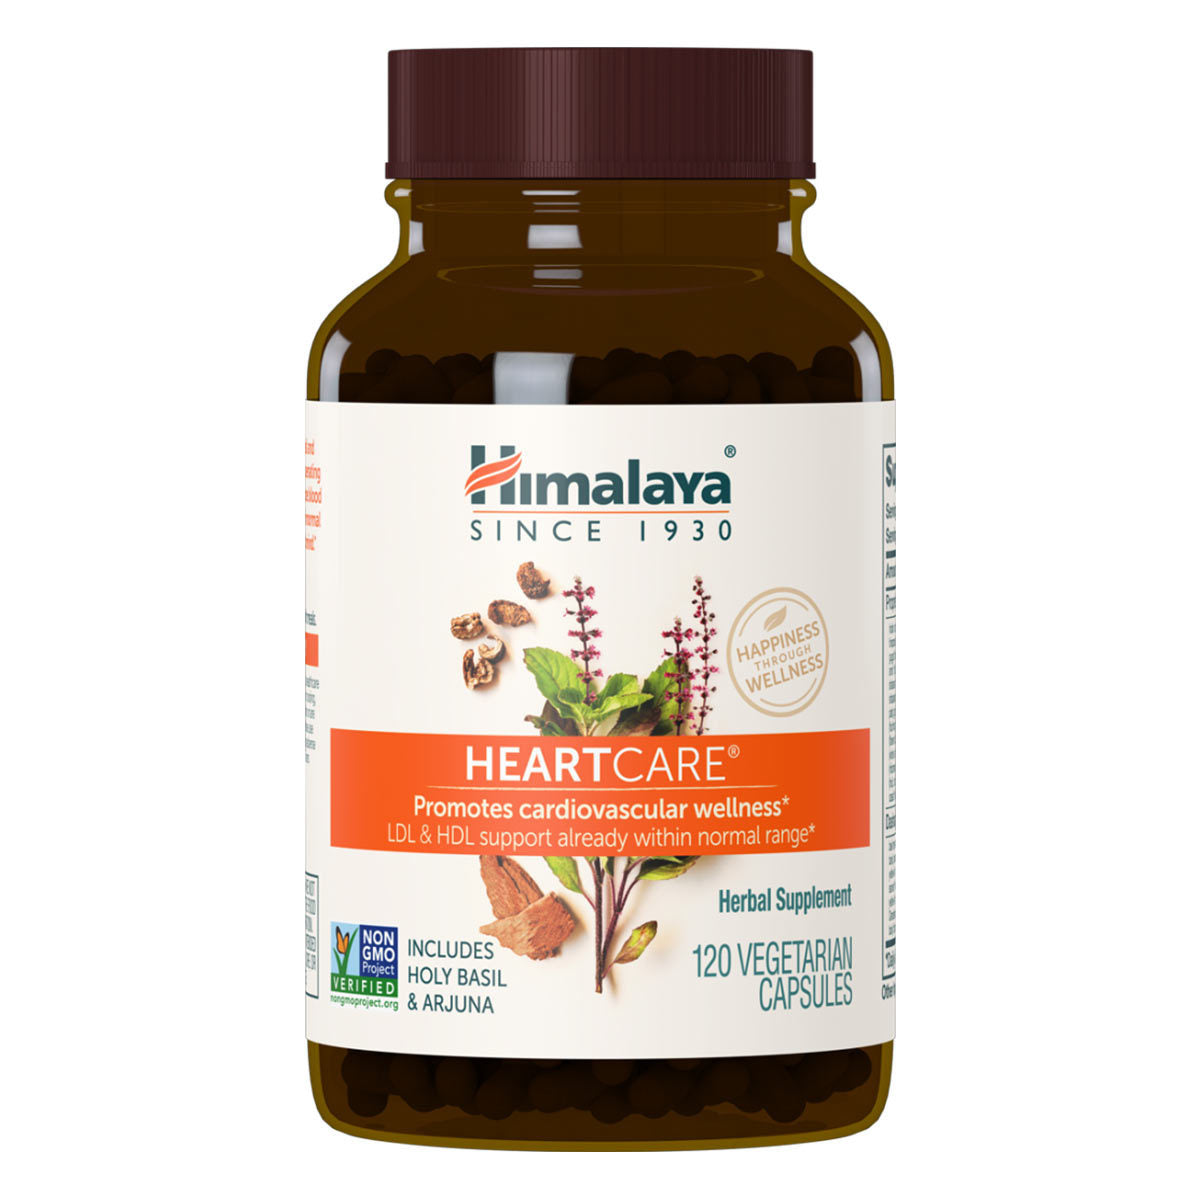 Primary image of HeartCare